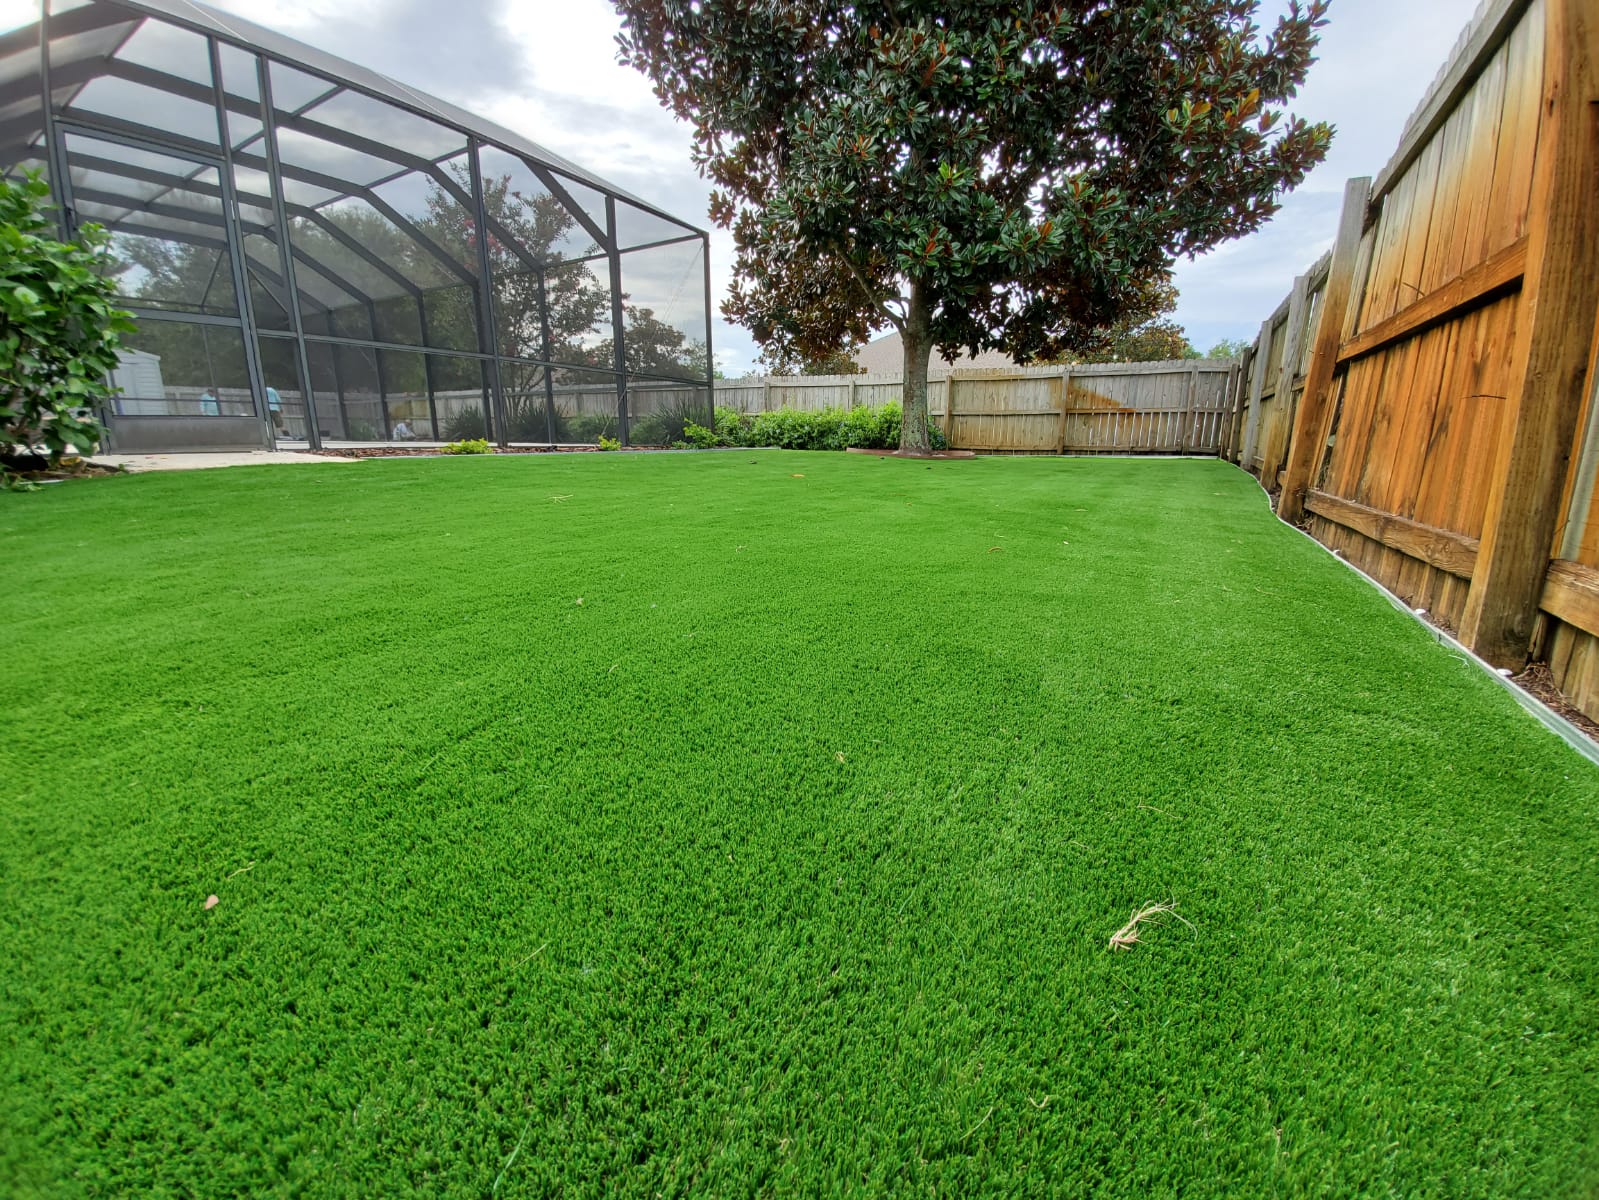 Products • Turf Grass Artificial Solutions • Fast Florida Delivery